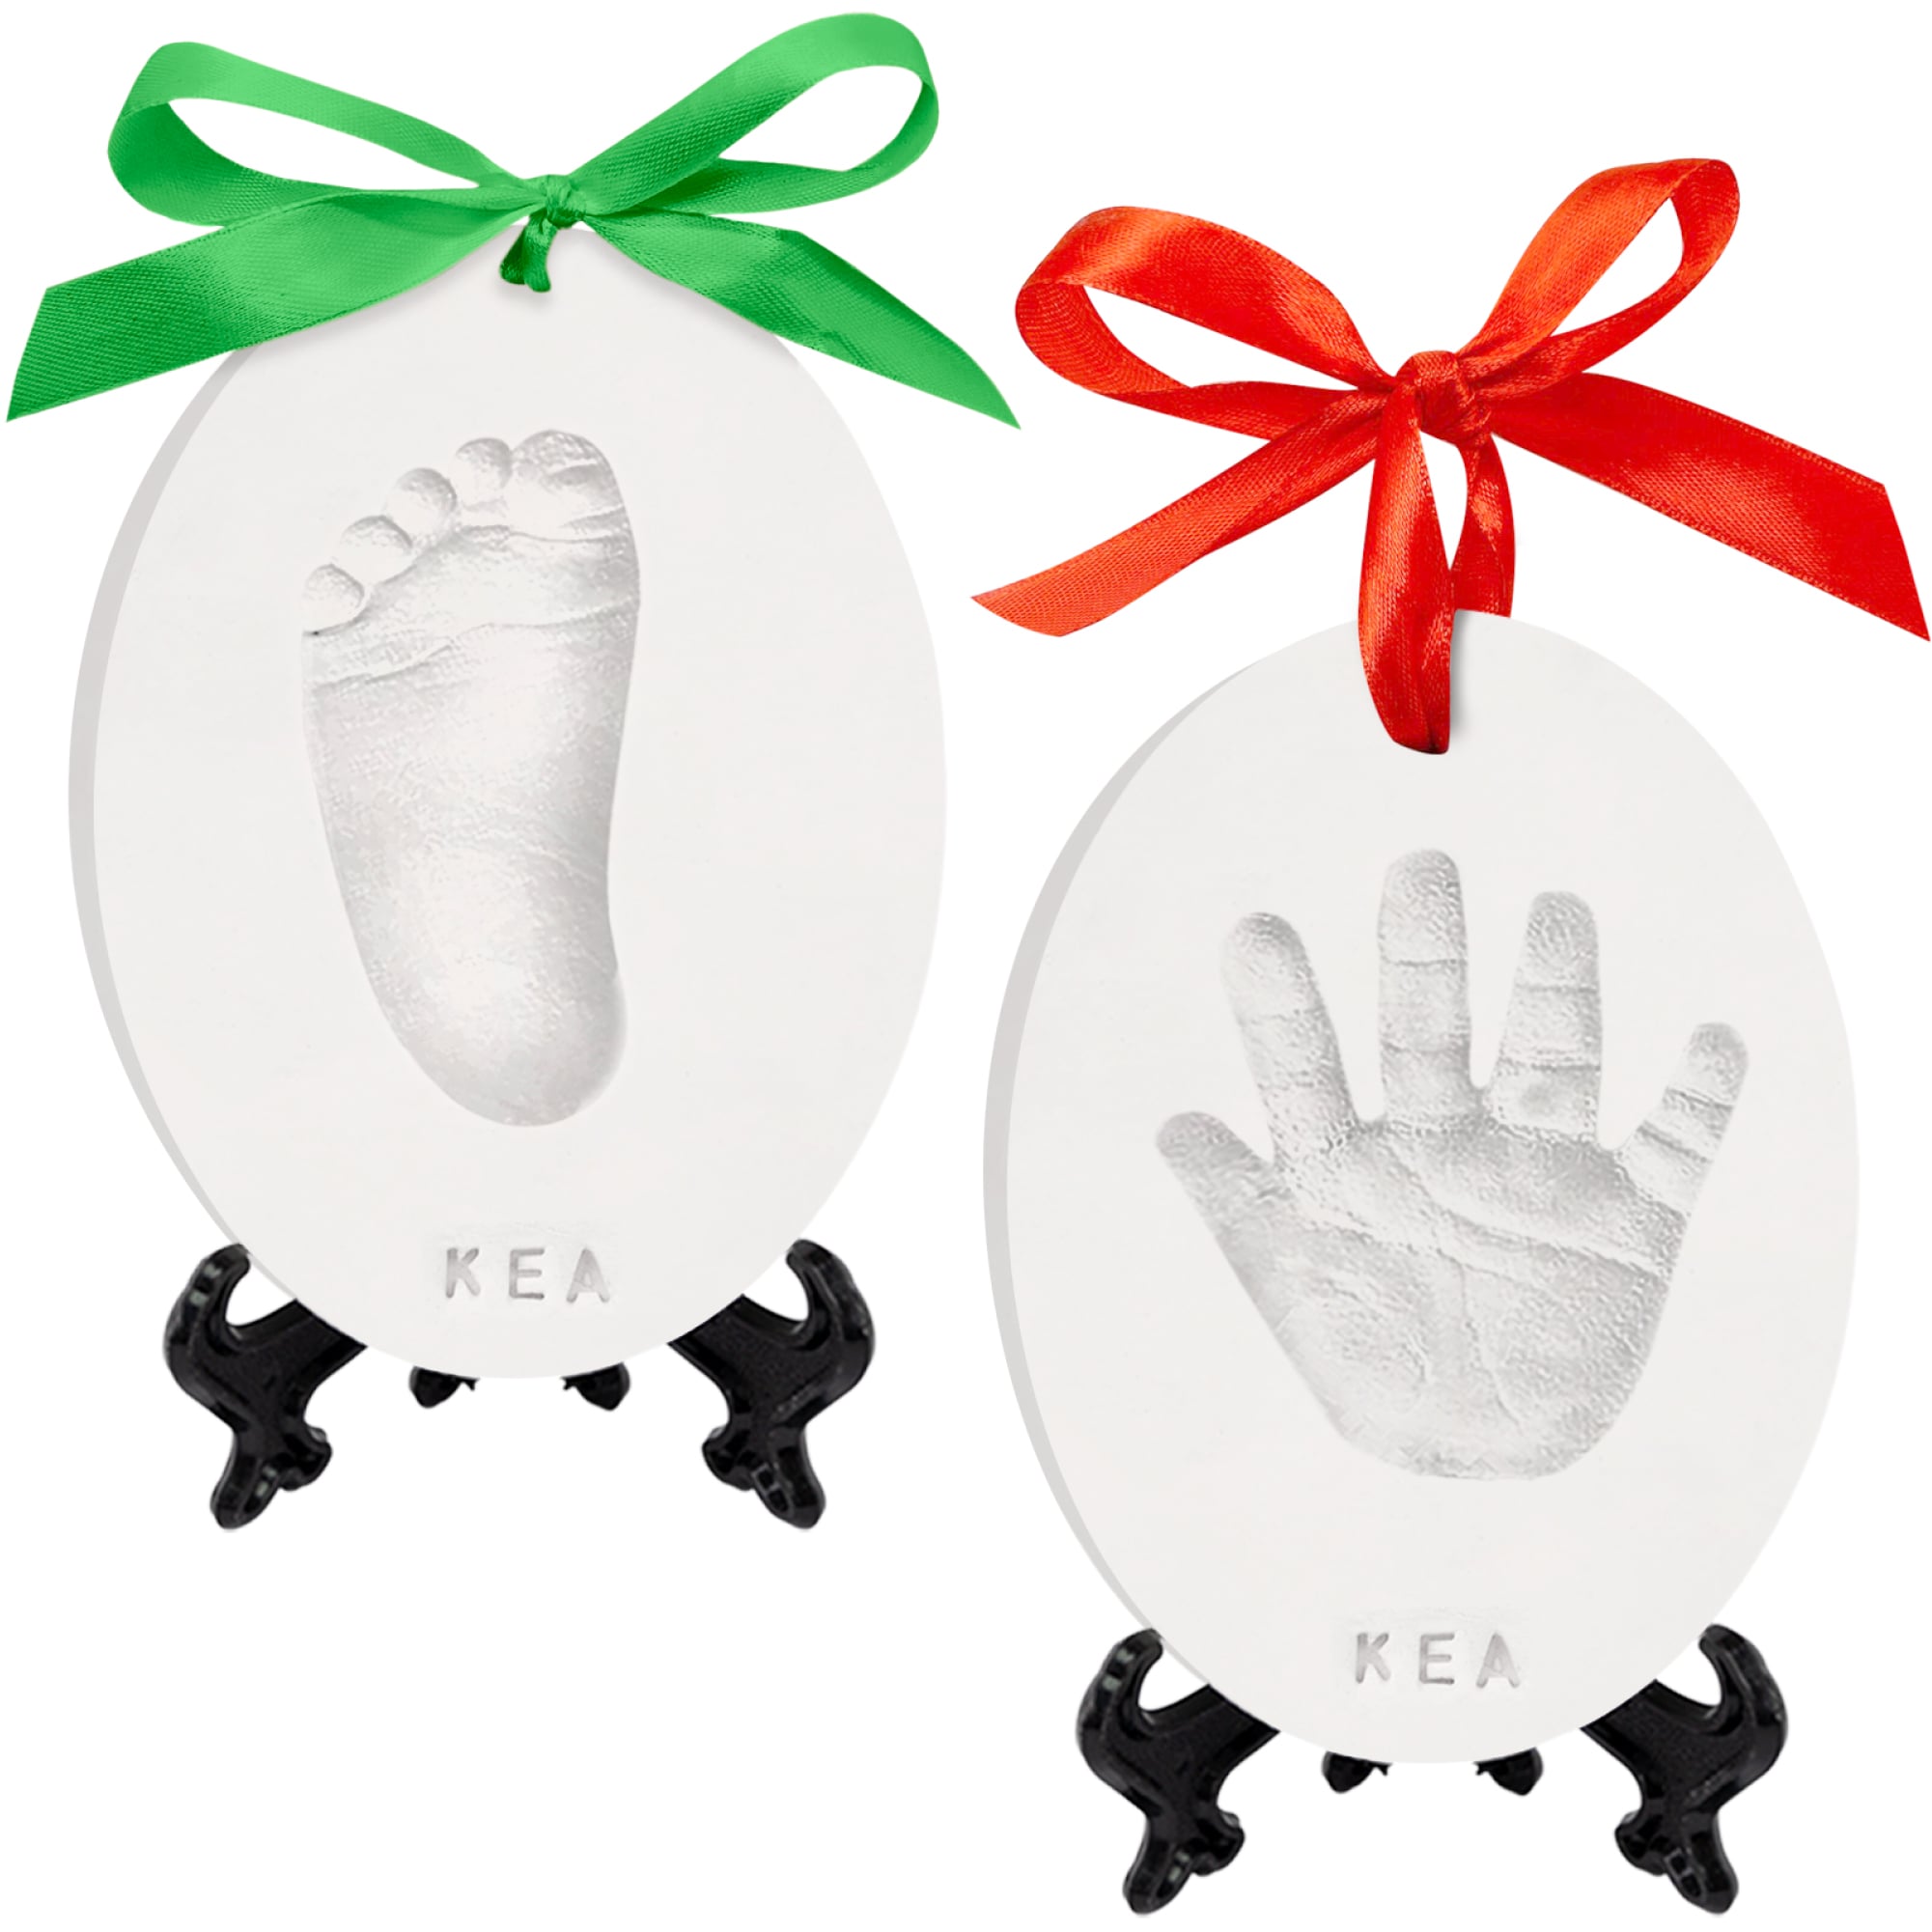 KeaBabies Trove Baby Hand and Footprint Kit, Dog Paw Print Kit, Handprint Ornament Kit for Babies, Boys, Girls, Newborns - with Love Multi Color